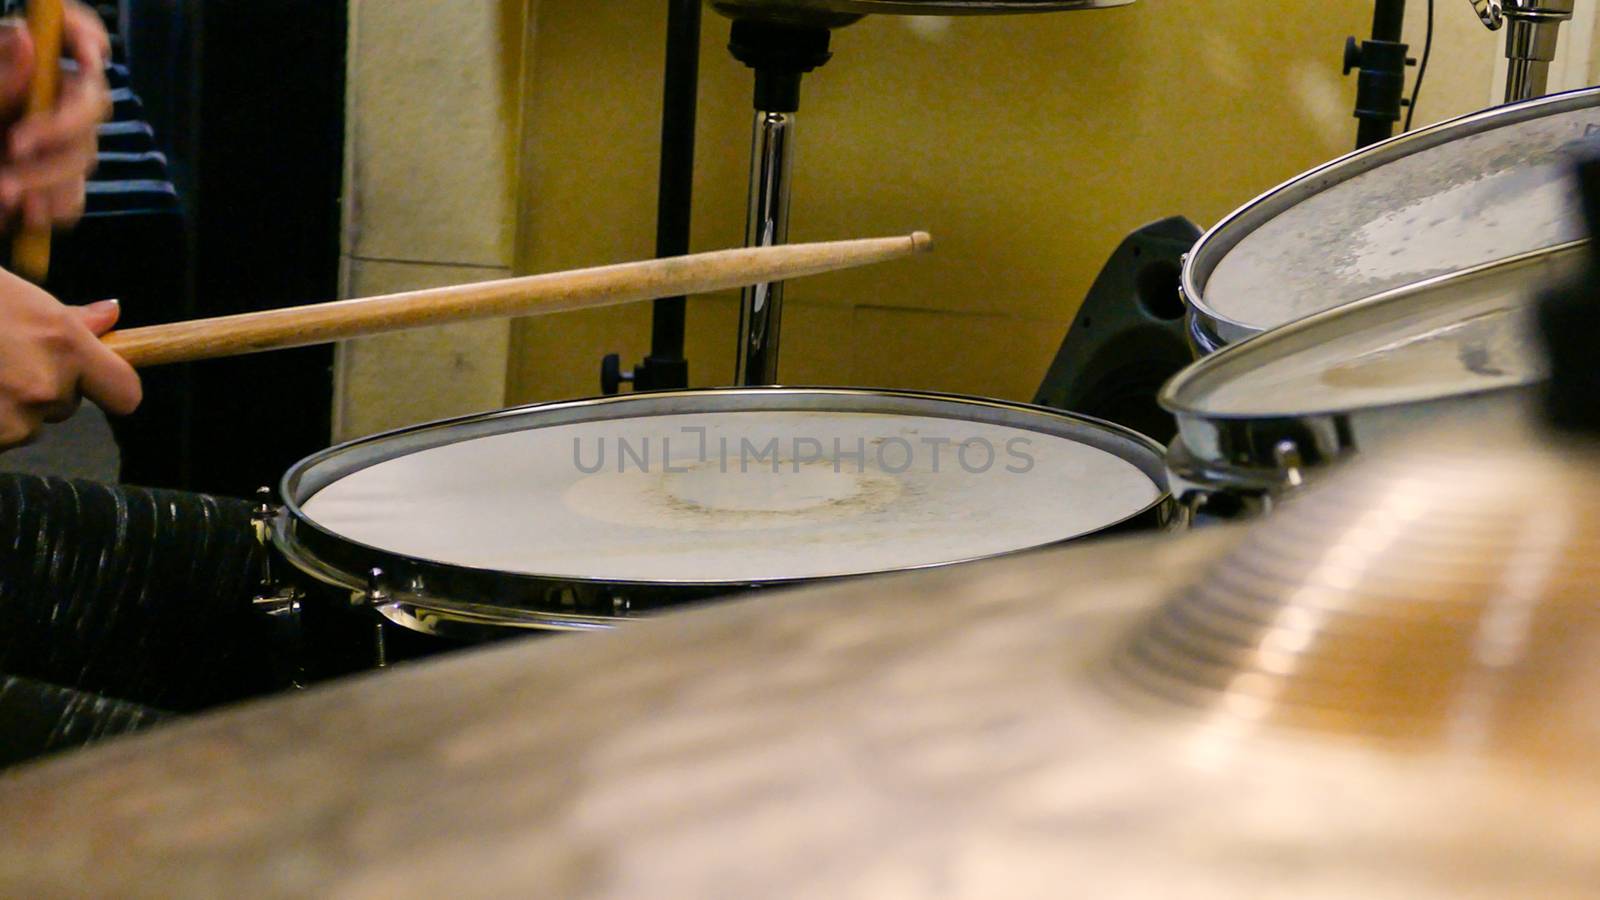 Playing drums on drum kit by imagesbykenny